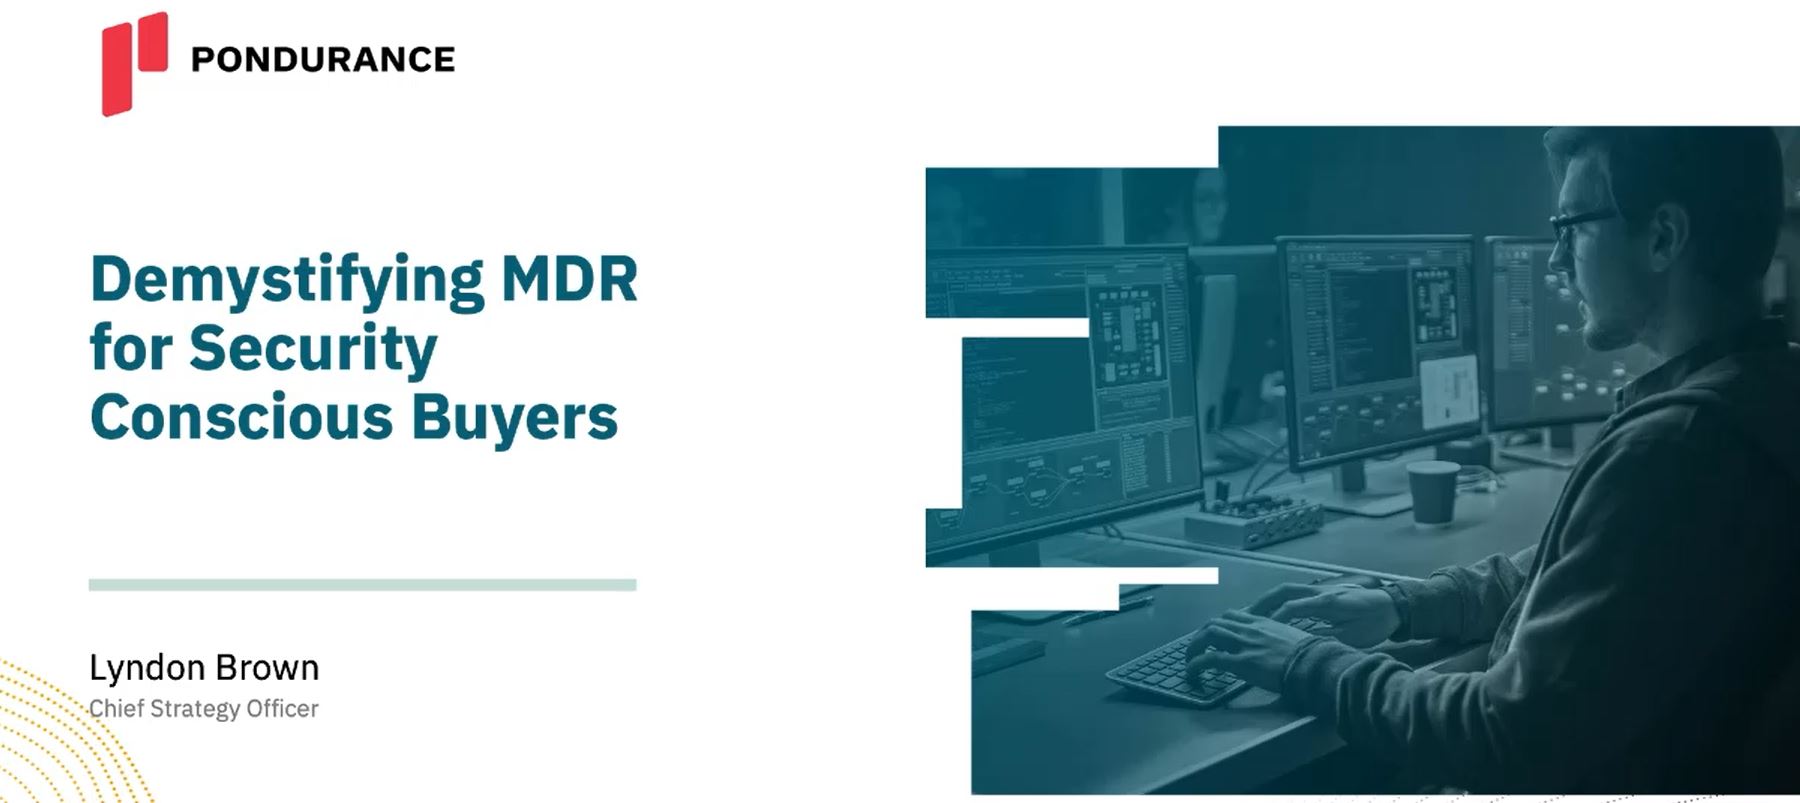 Demystifying MDR for Security Conscious Buyers